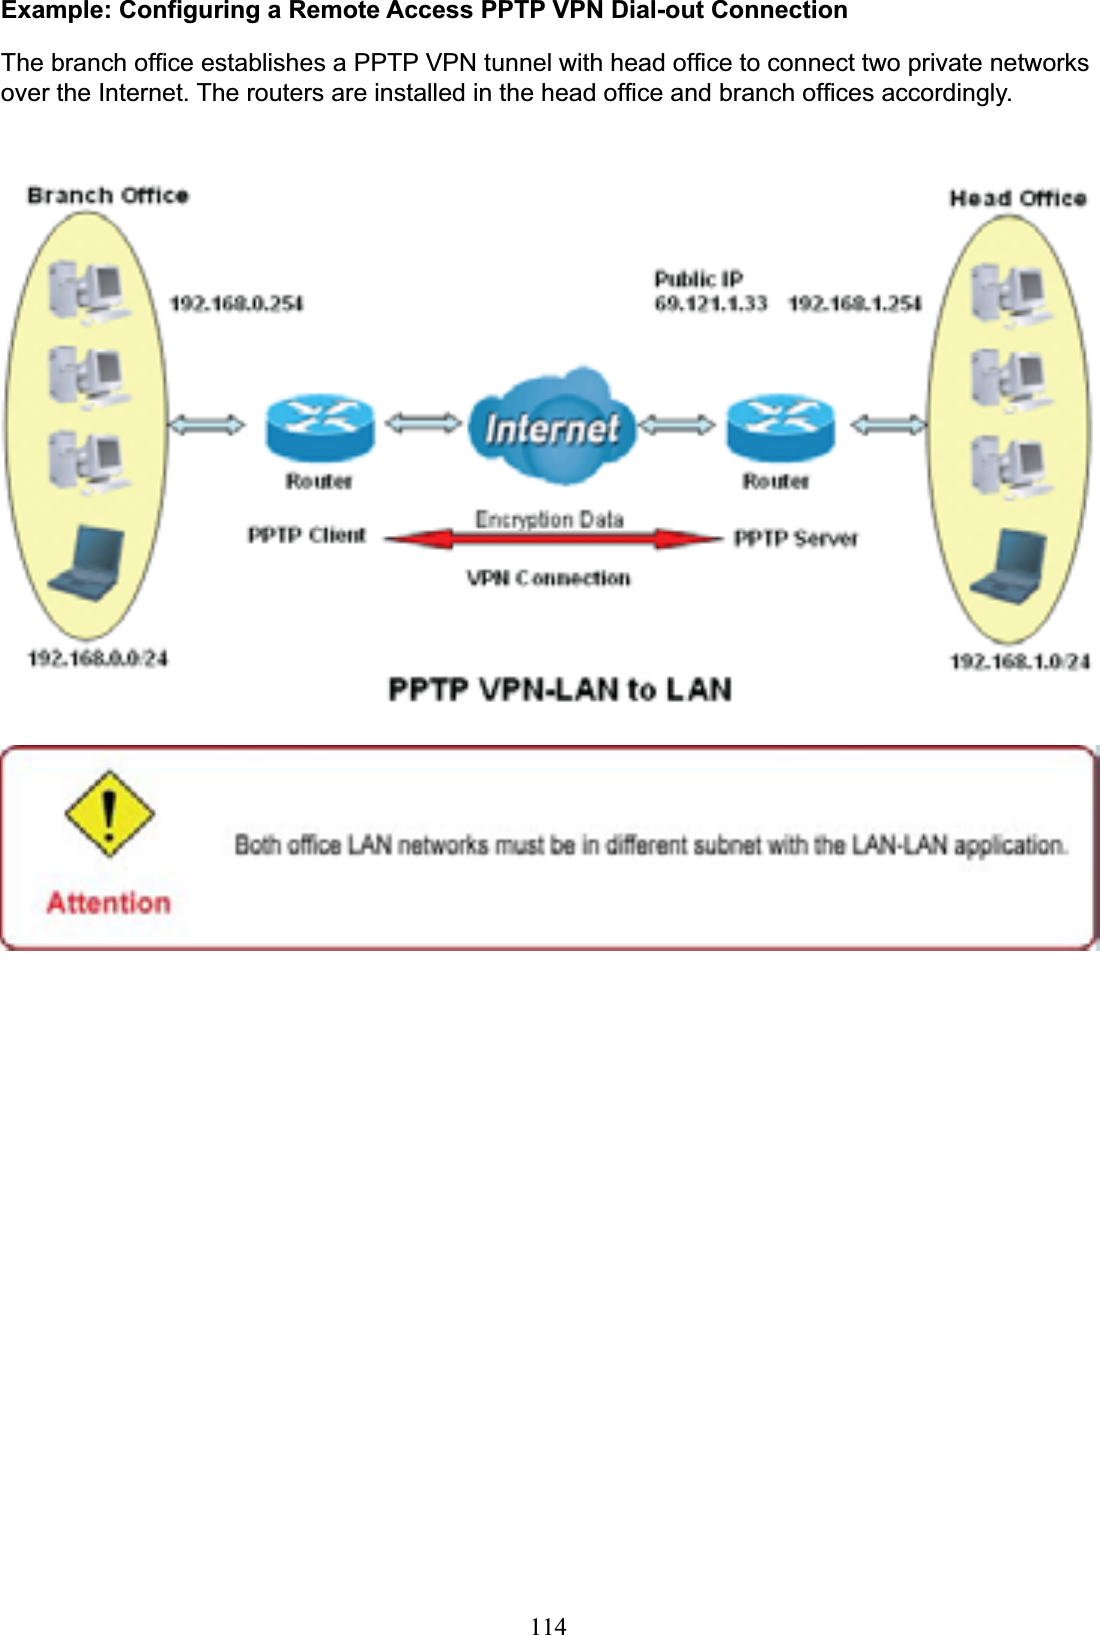 114Example: Configuring a Remote Access PPTP VPN Dial-out ConnectionThe branch office establishes a PPTP VPN tunnel with head office to connect two private networks over the Internet. The routers are installed in the head office and branch offices accordingly. 